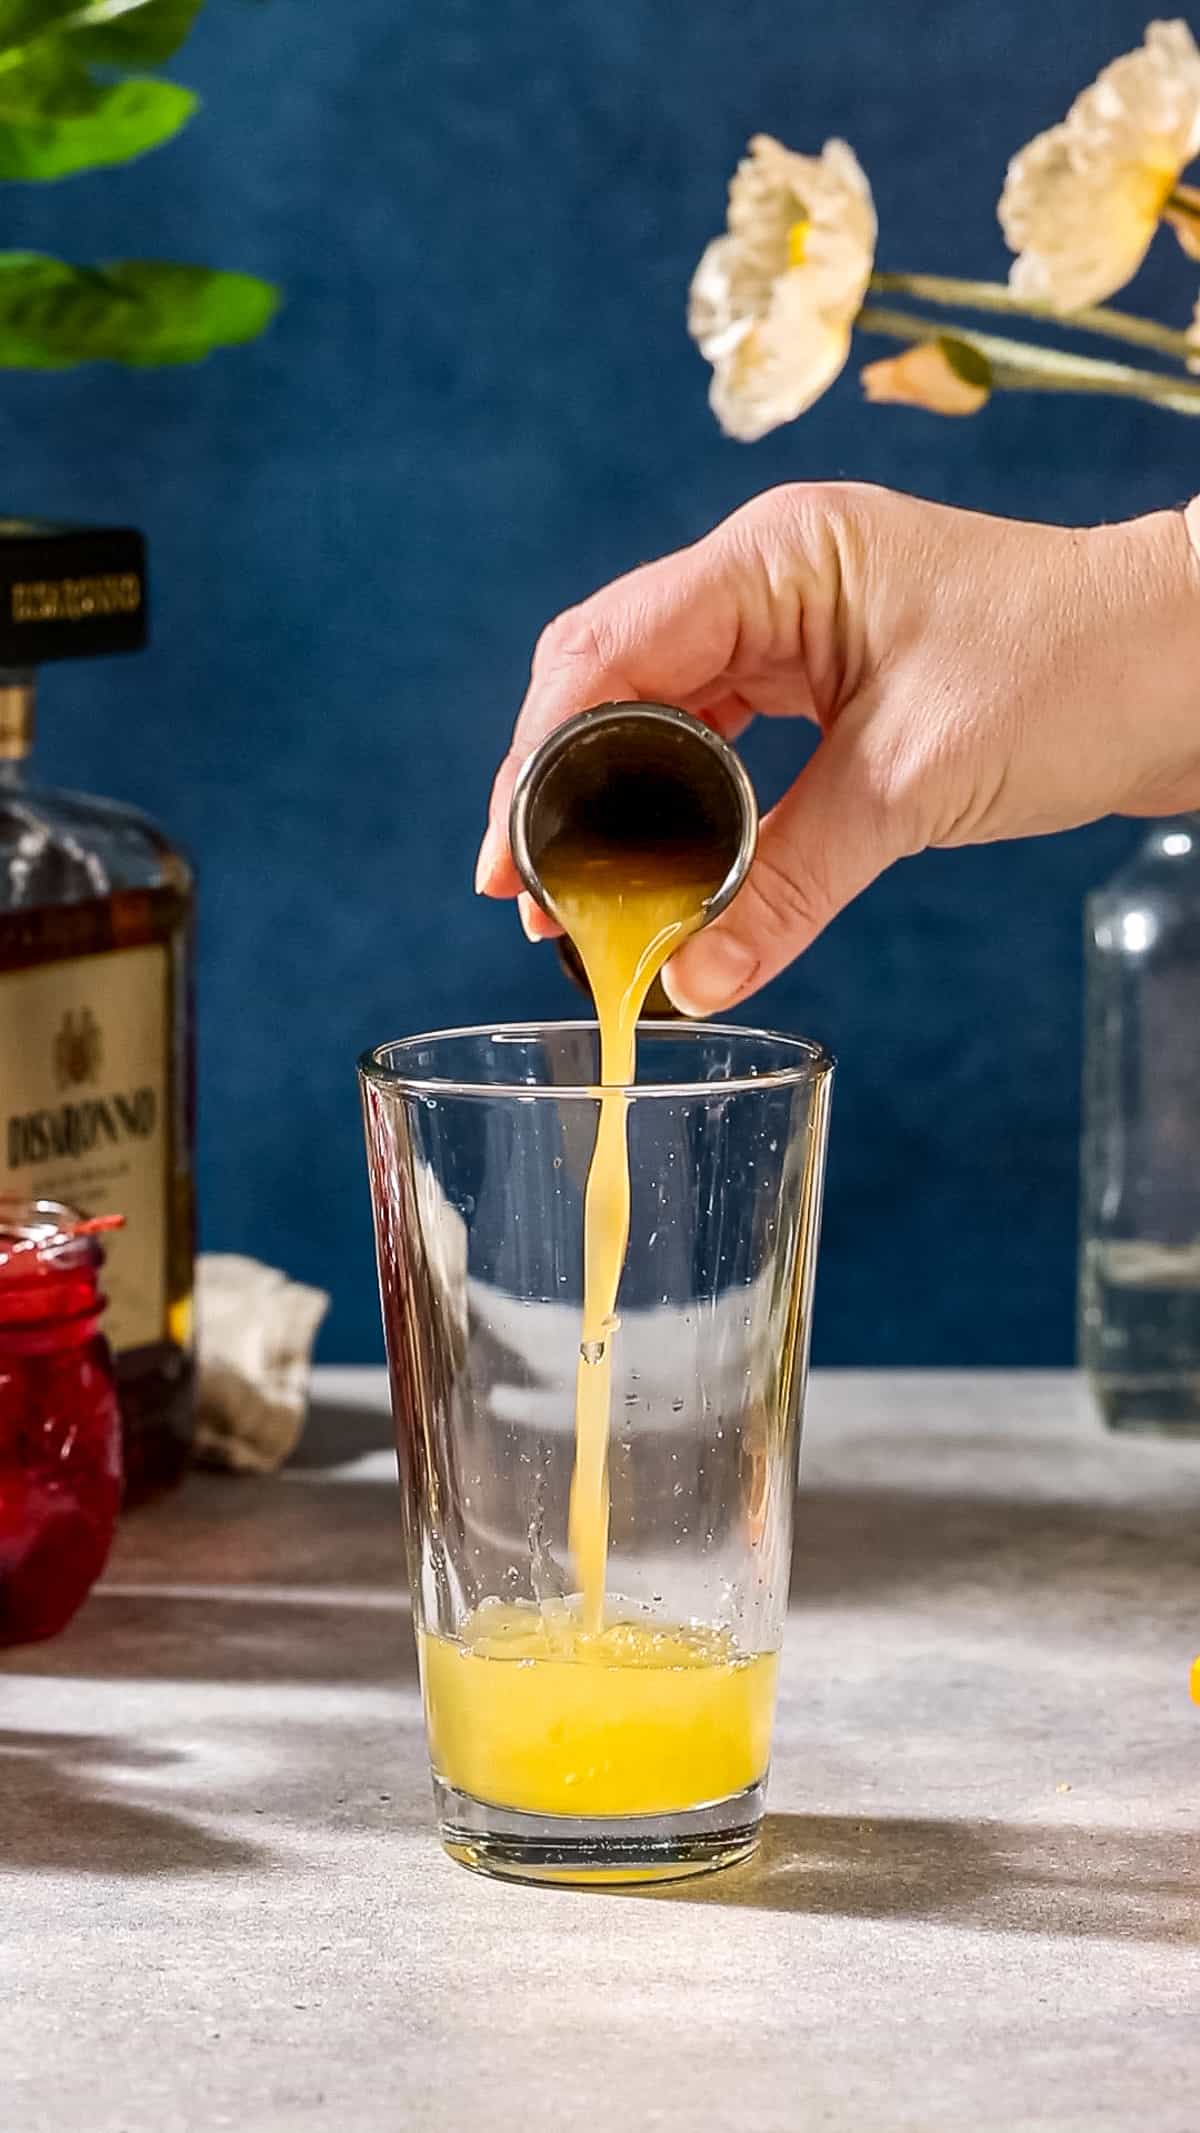 Pouring the orange juice into the cocktail shaker glass.